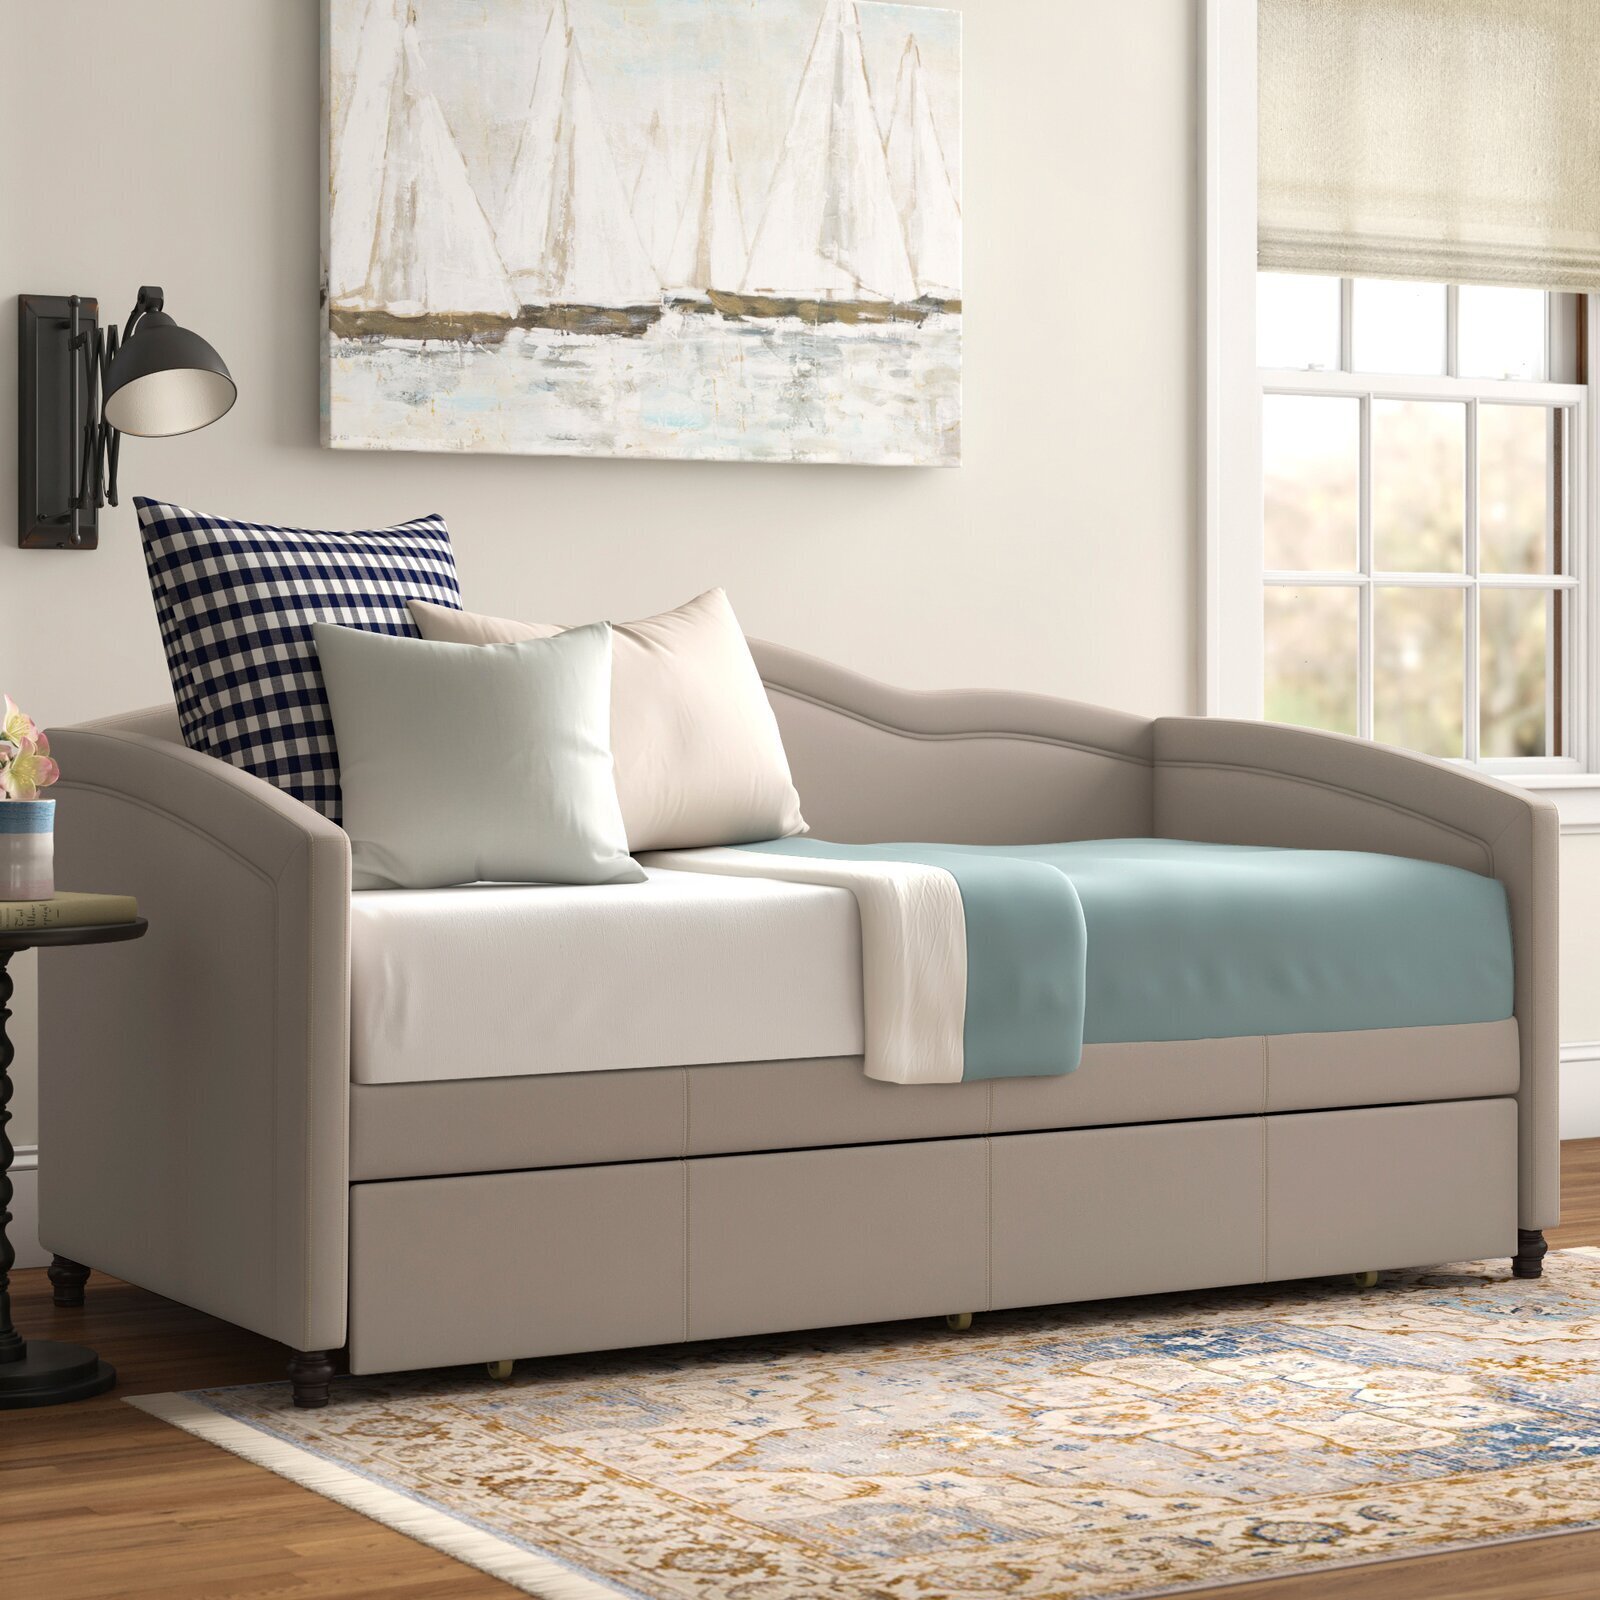 Upholstered Daybed with Trundle